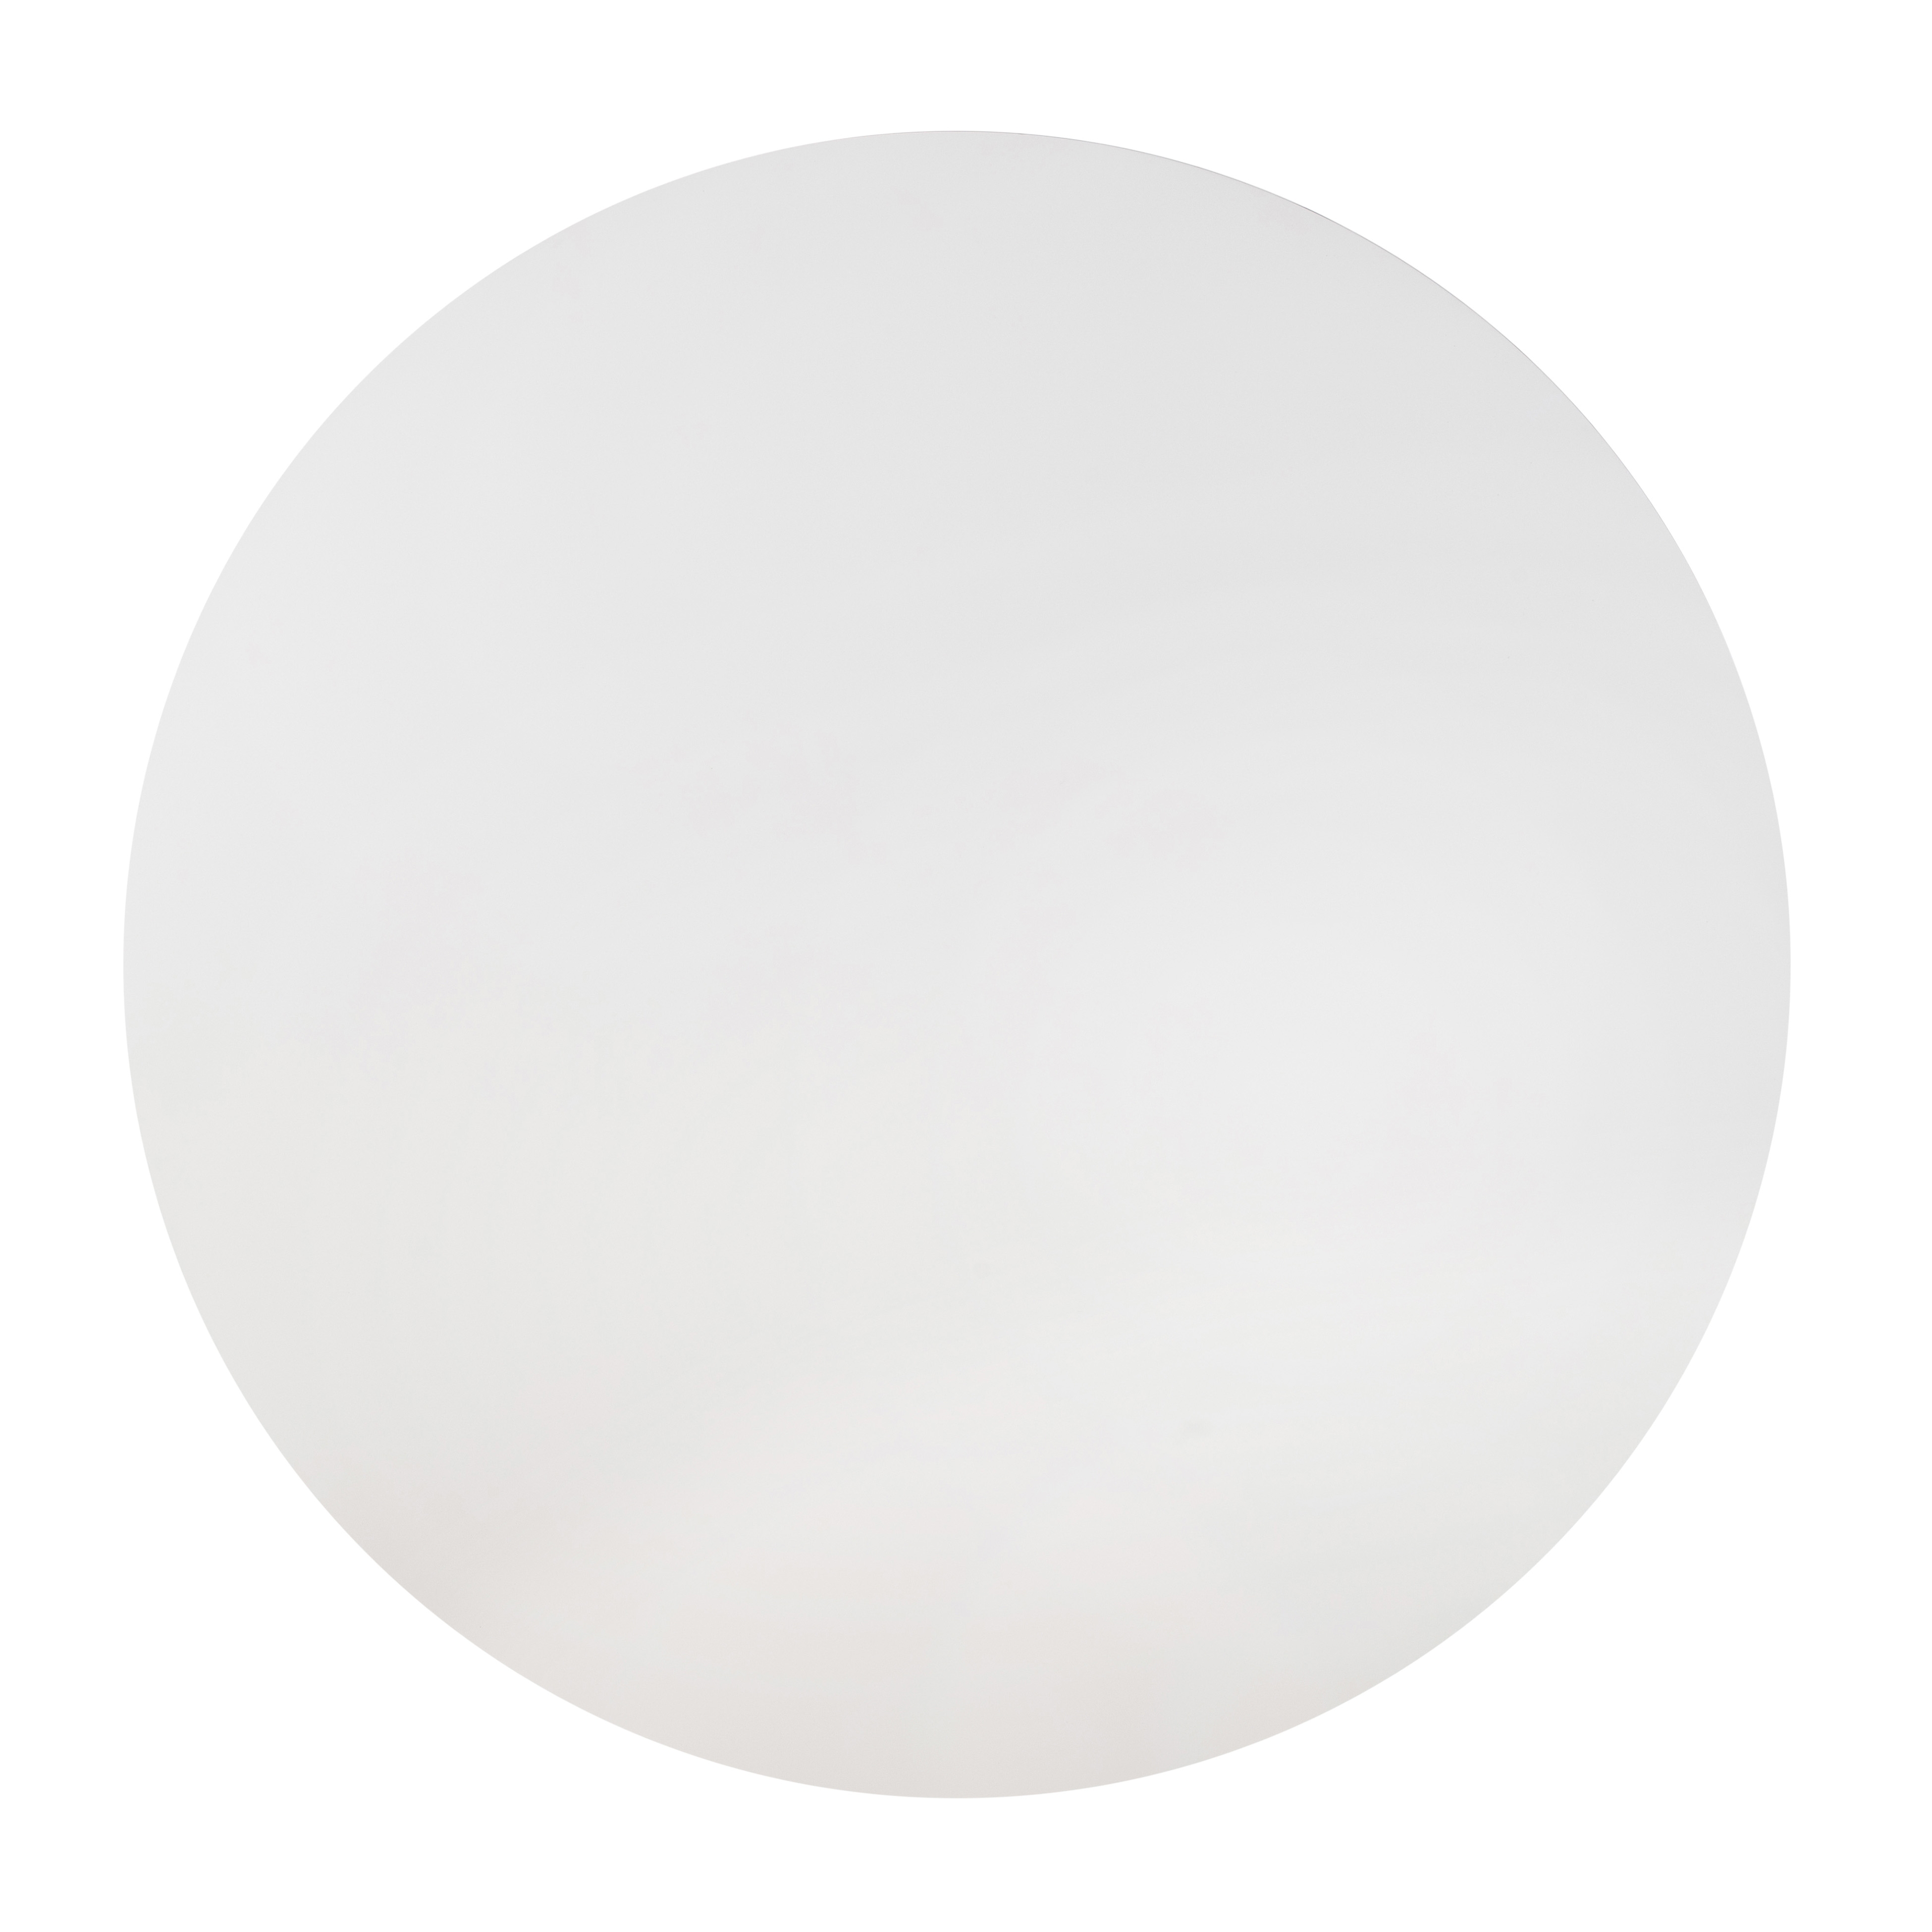 Kali 55 Inch White Round Dining Table - Image 3